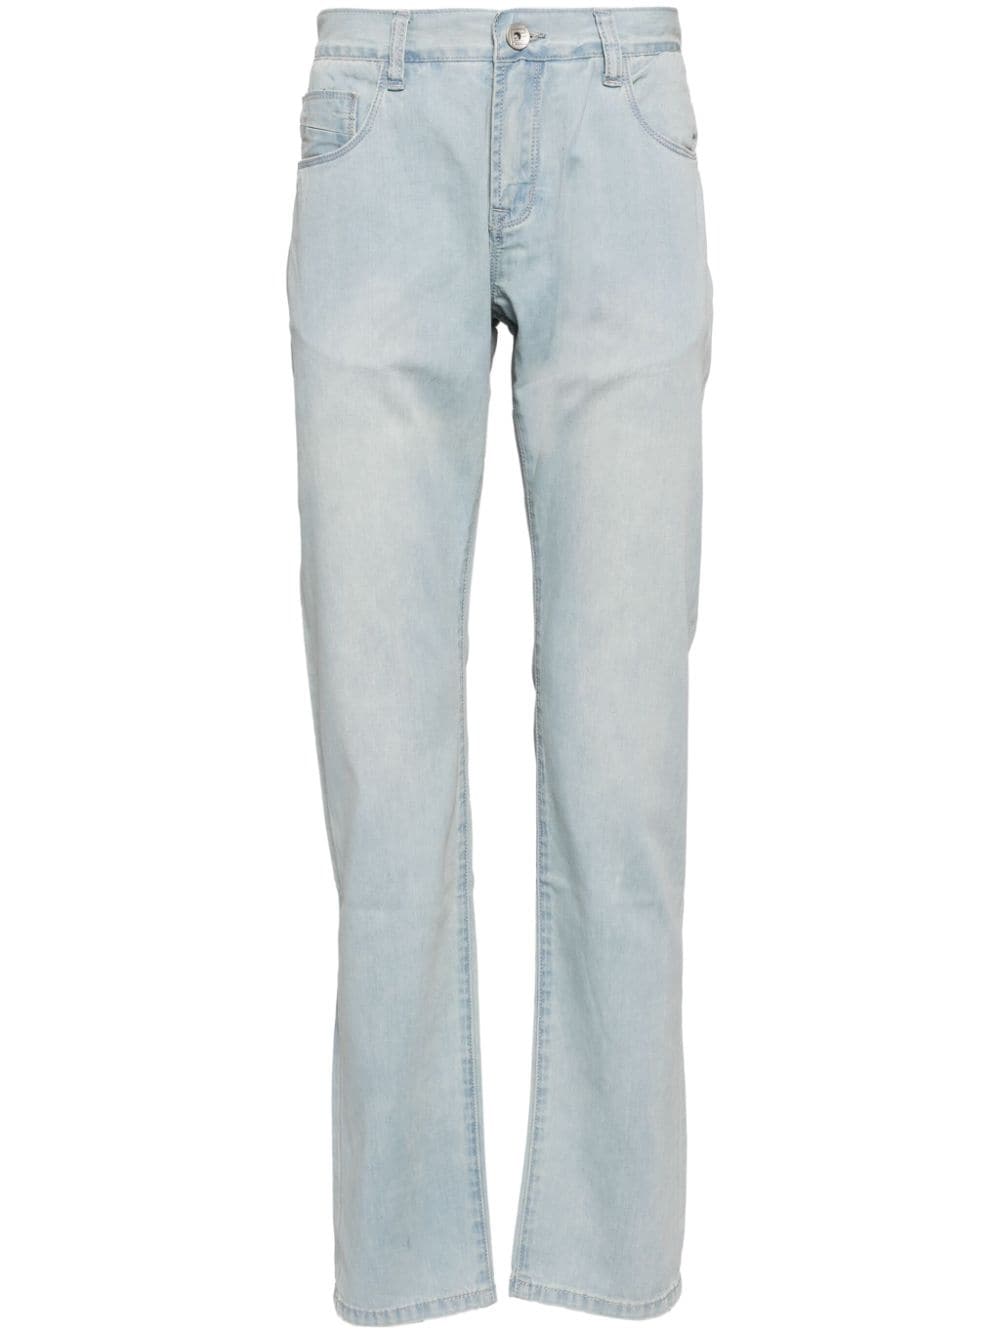 The William cotton-blend jeans